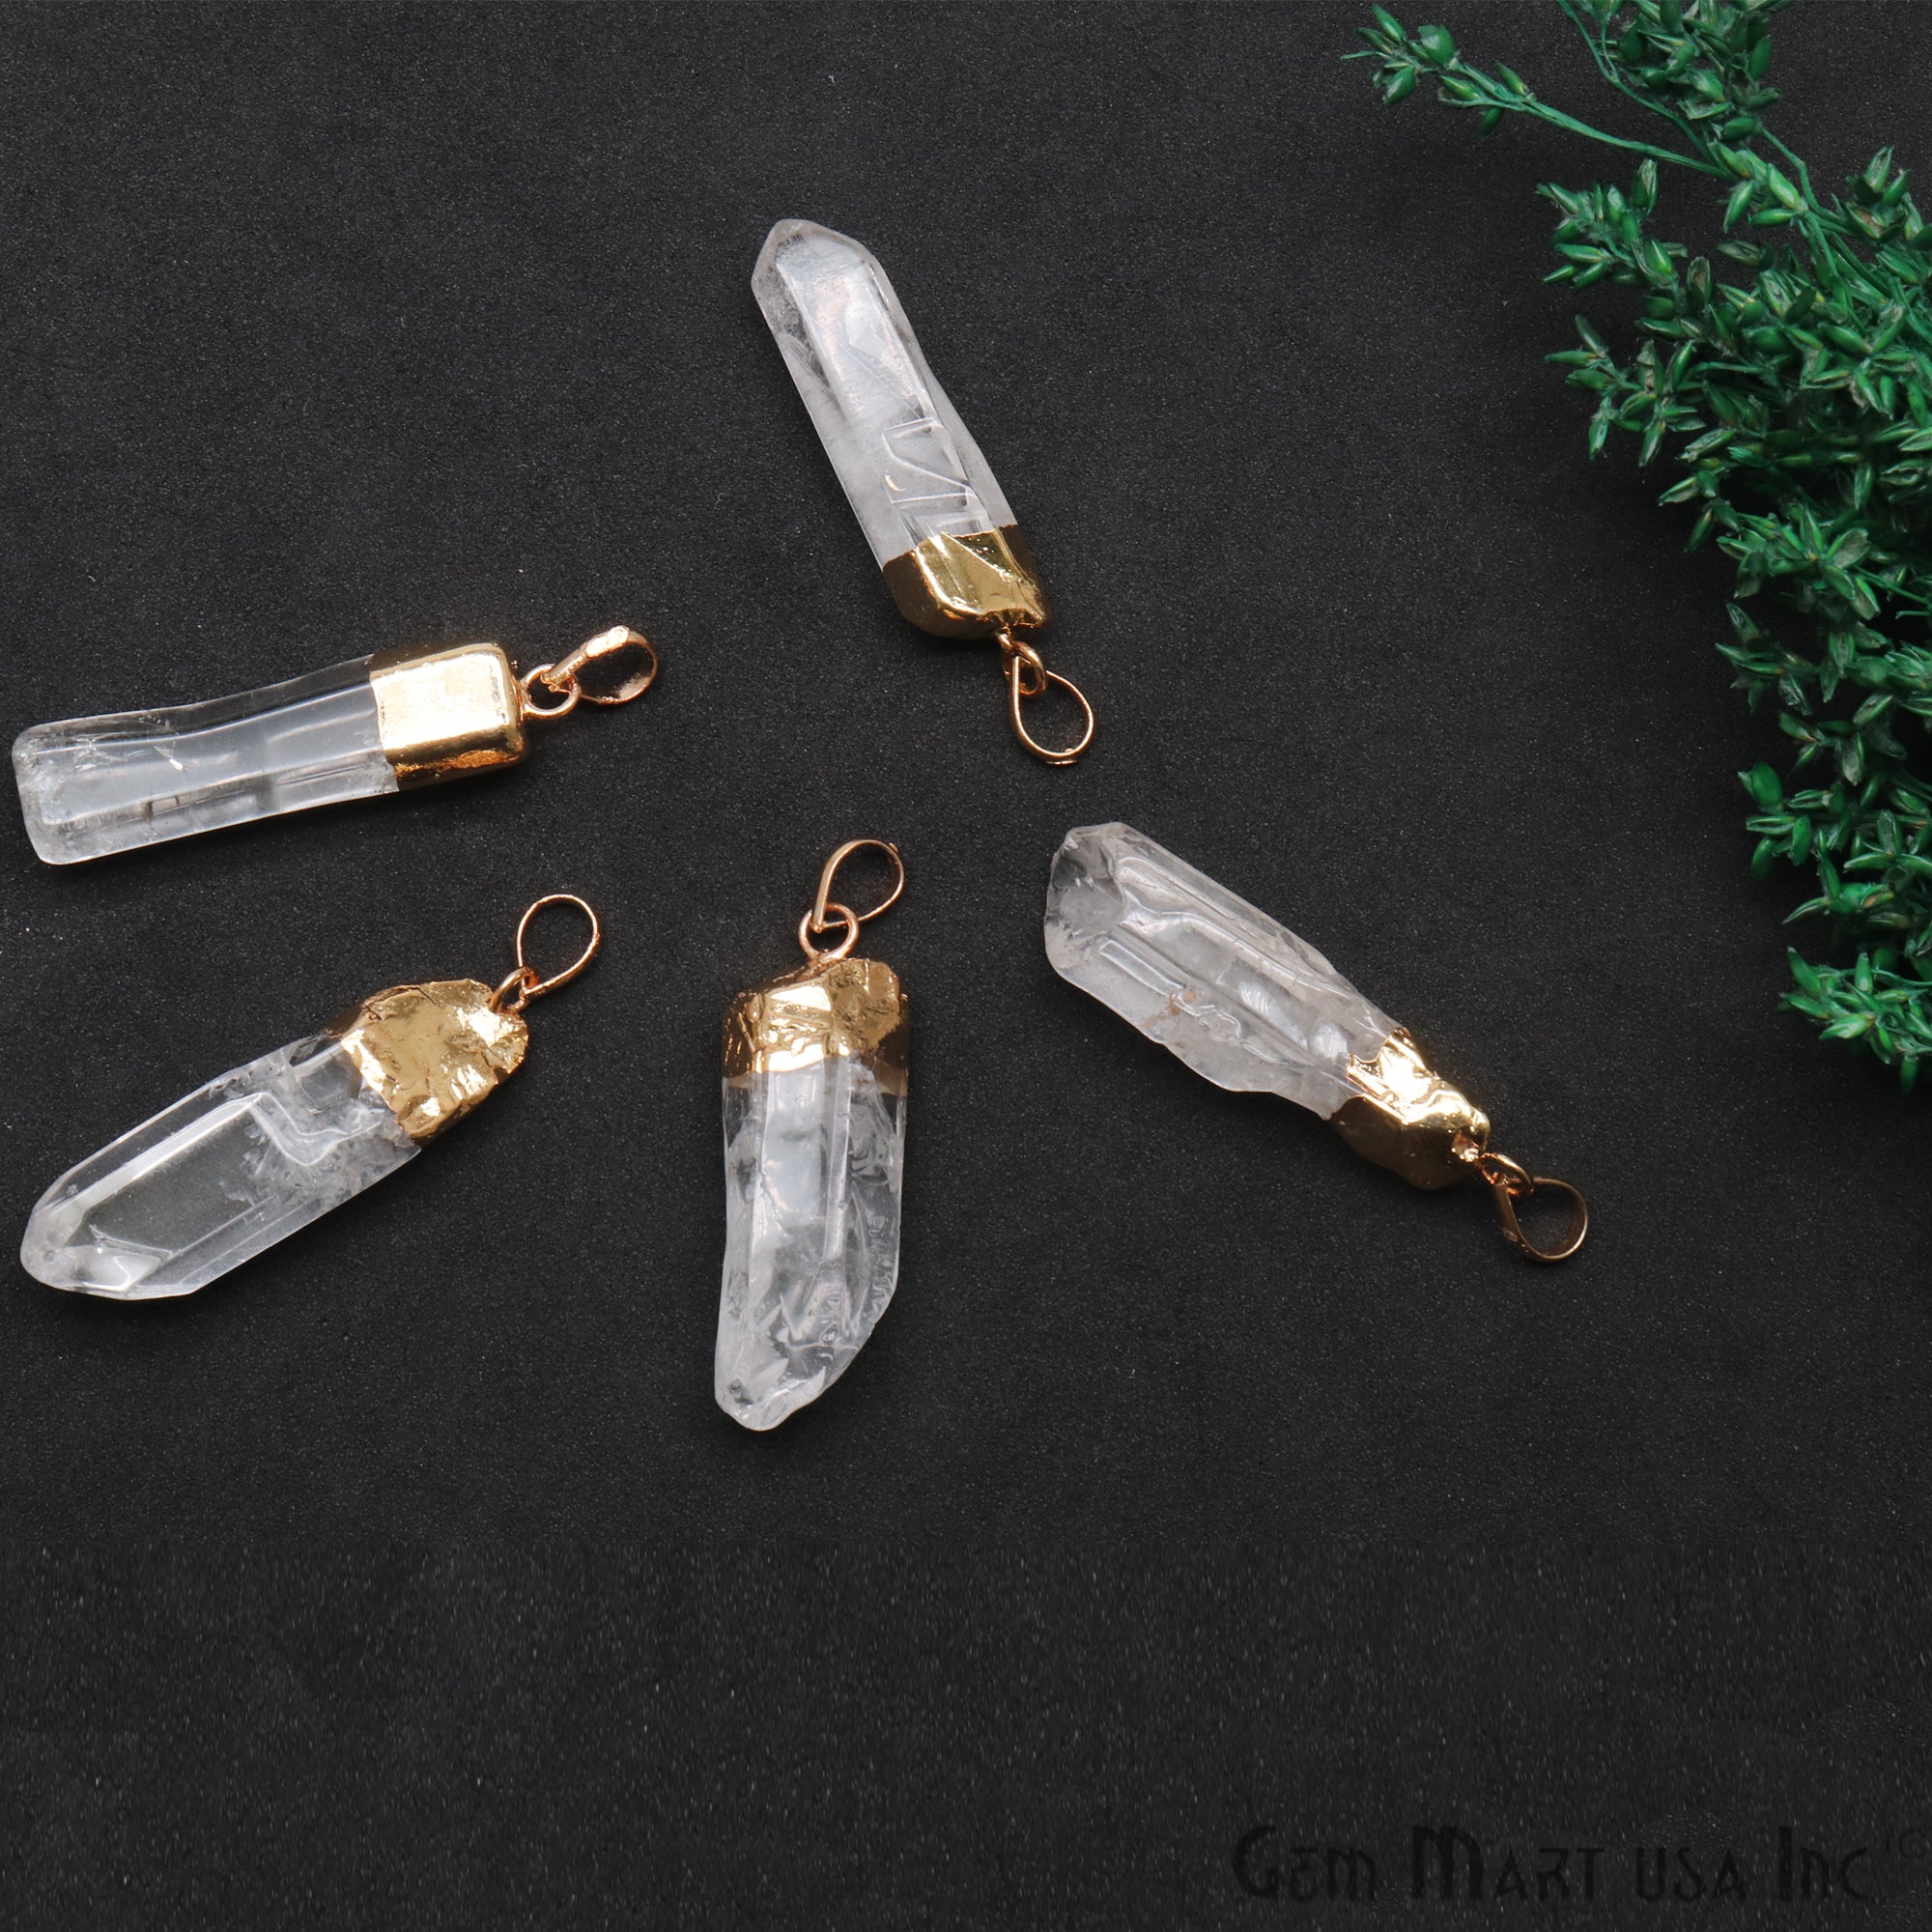 Crystal Point Pencil Pendant, 42x9mm 24k Gold Plated Gemstone Point Pencil Charm Pendant(GPCL-14046)